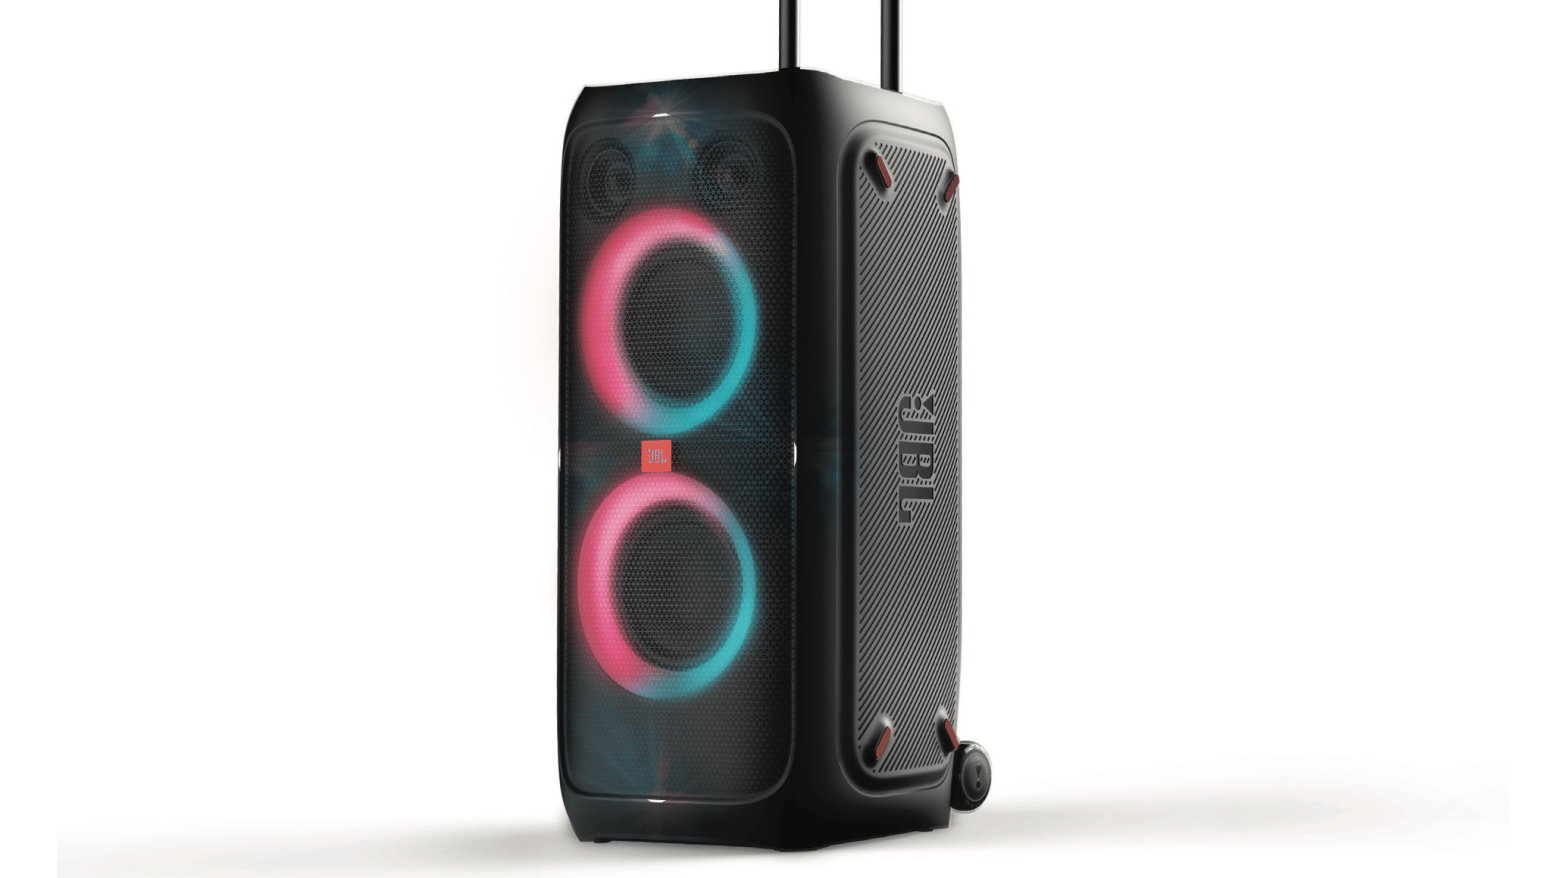 JBL's all-new new PartyBox 310 Bluetooth speaker with built-in light show. (Image: JBL)